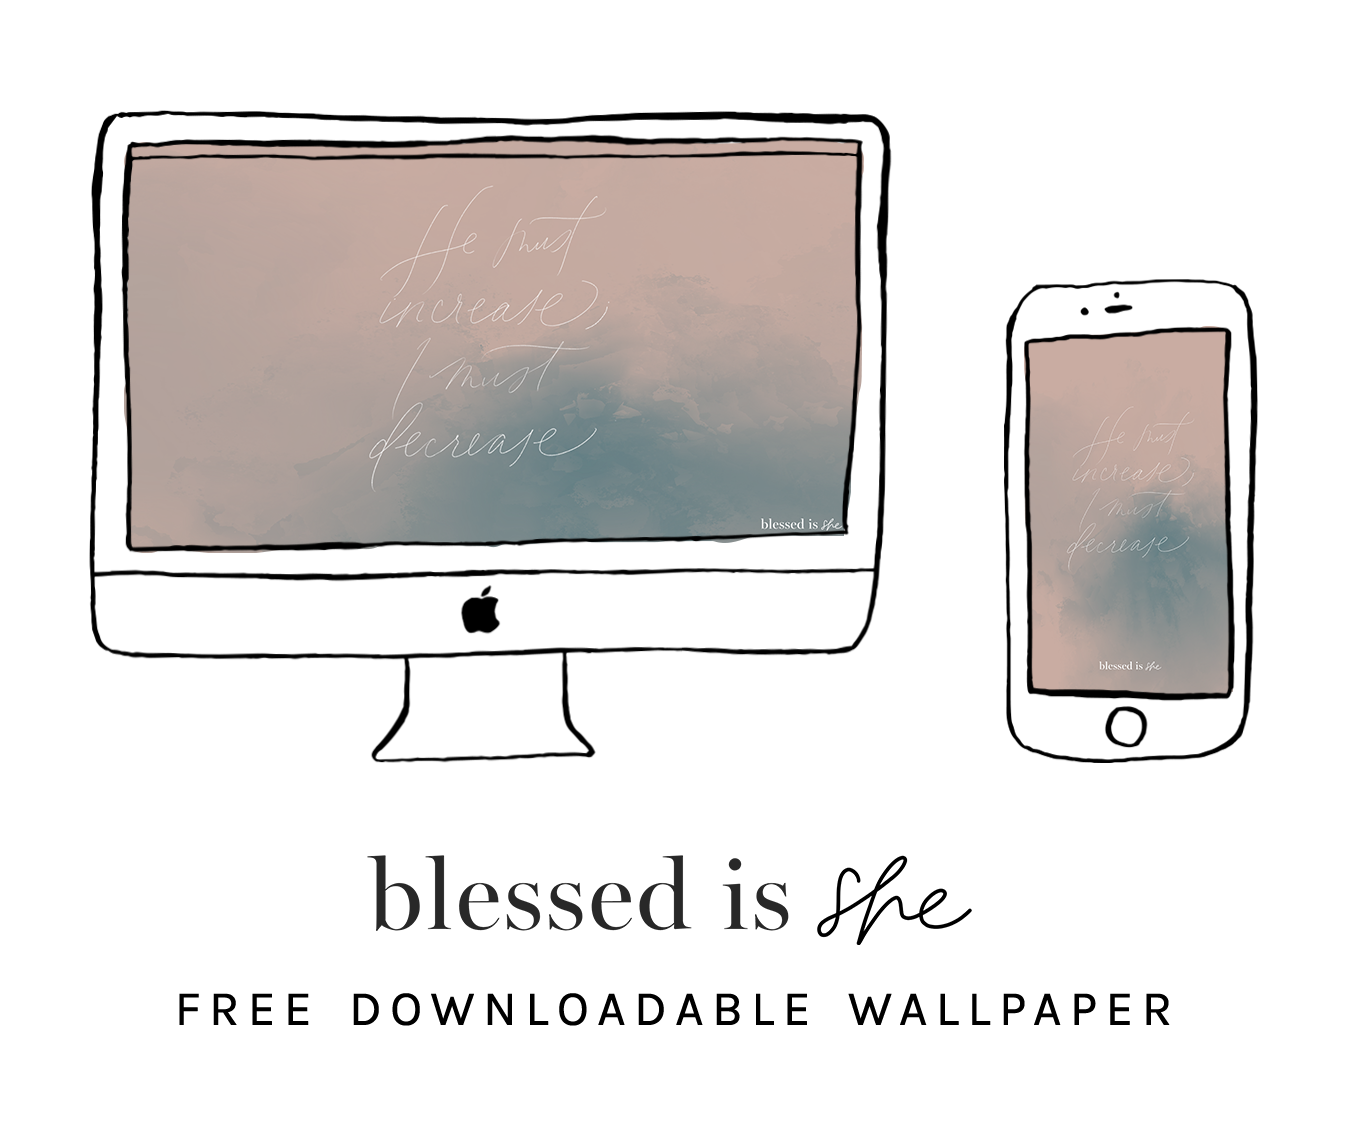 Christmas Wallpaper Blessed Is She - HD Wallpaper 